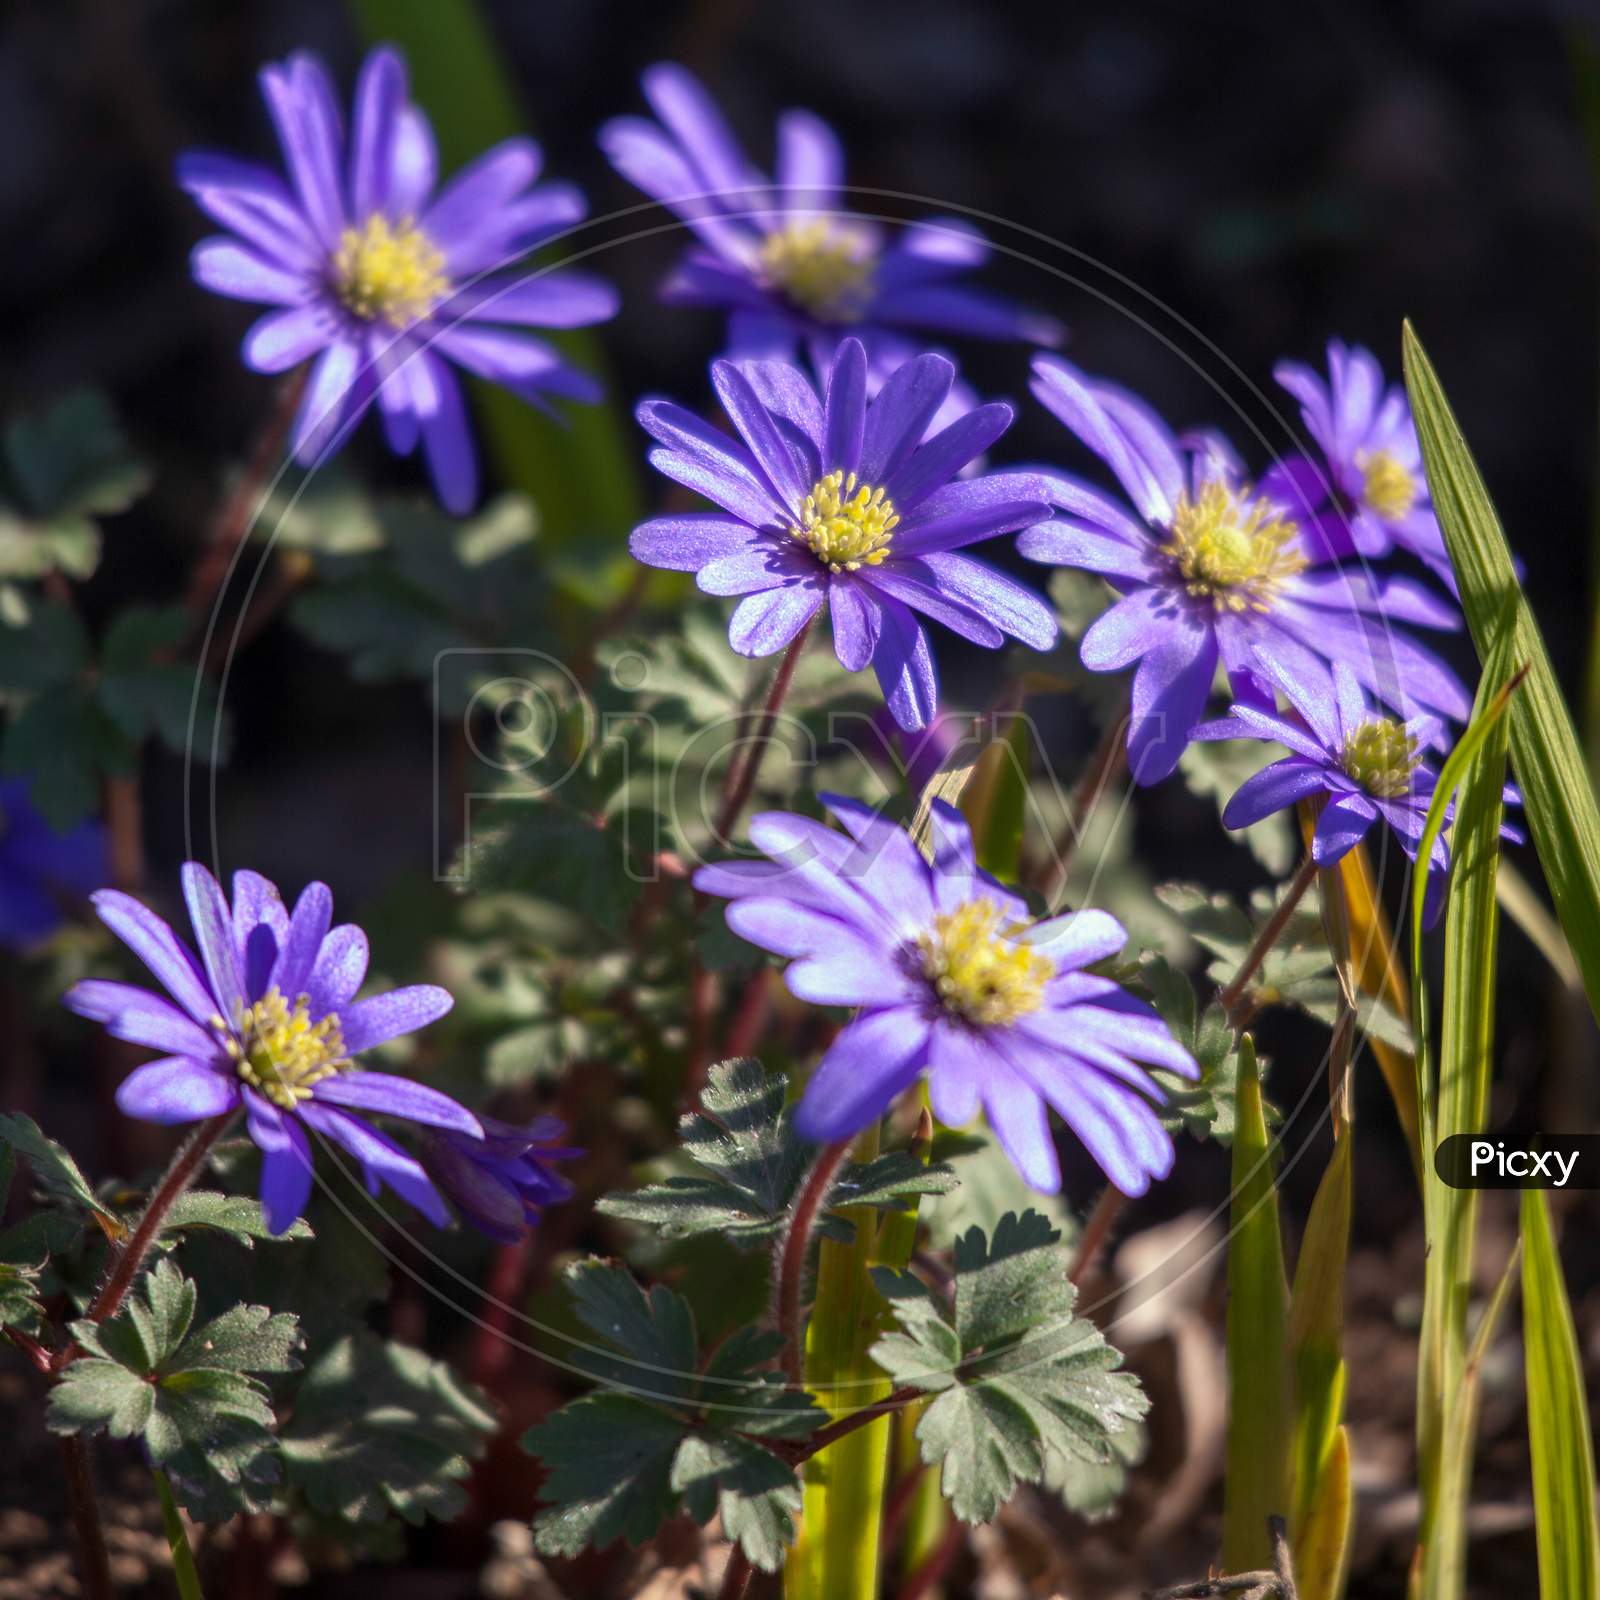 Blue Anemone Flowers With A Yellow Centre